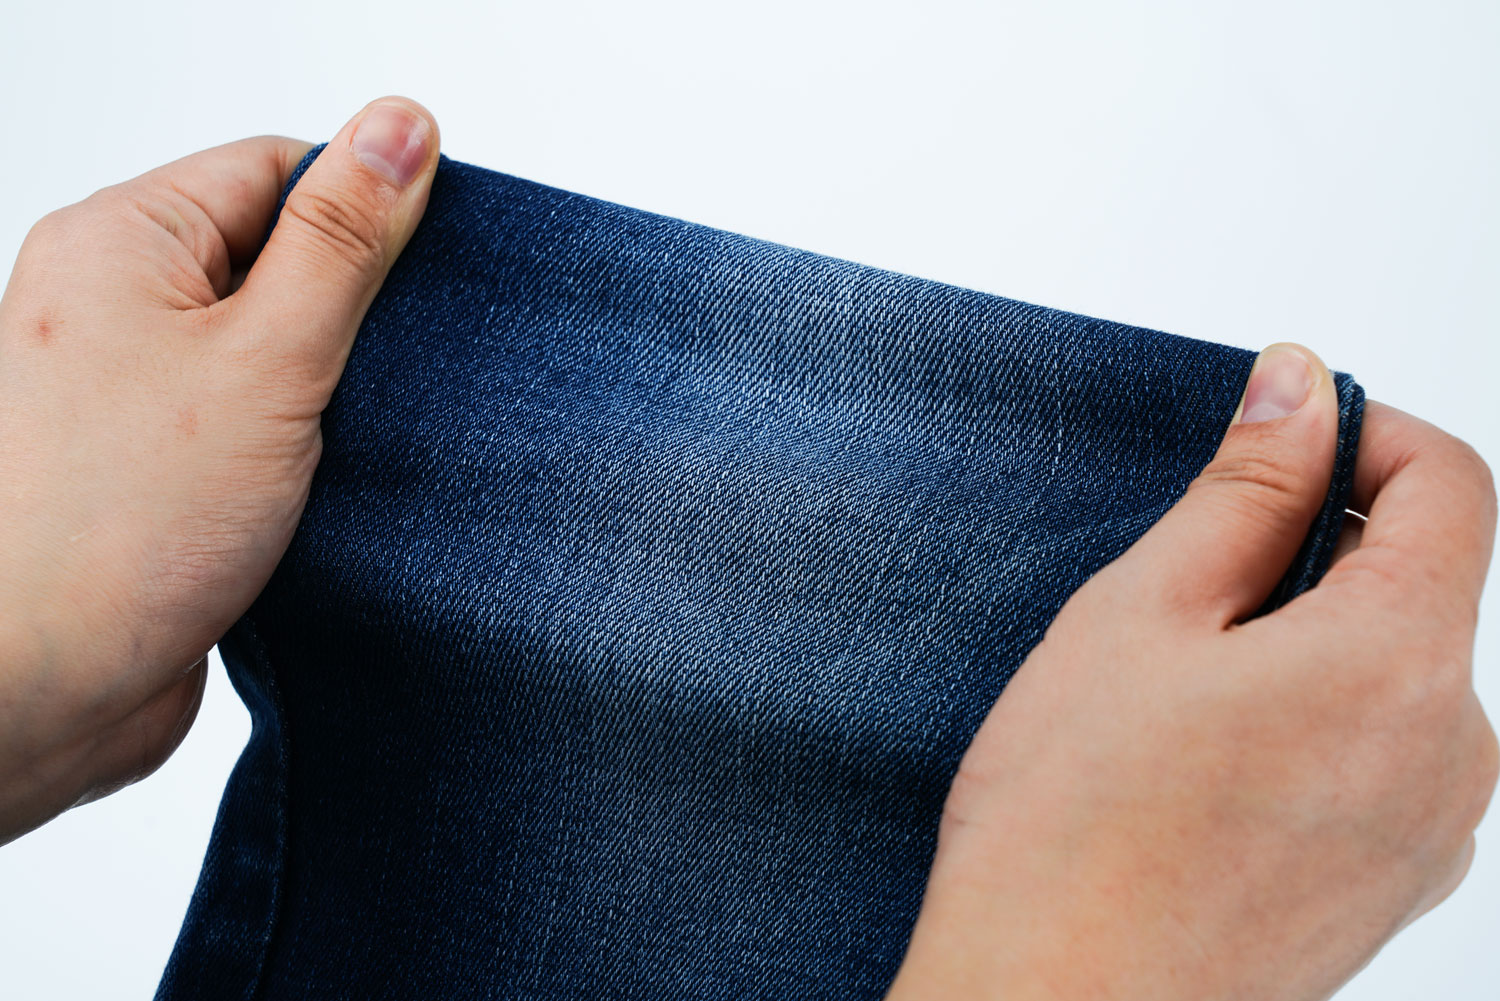 Quality Denim - How to Use the Best One for Your Needs 2